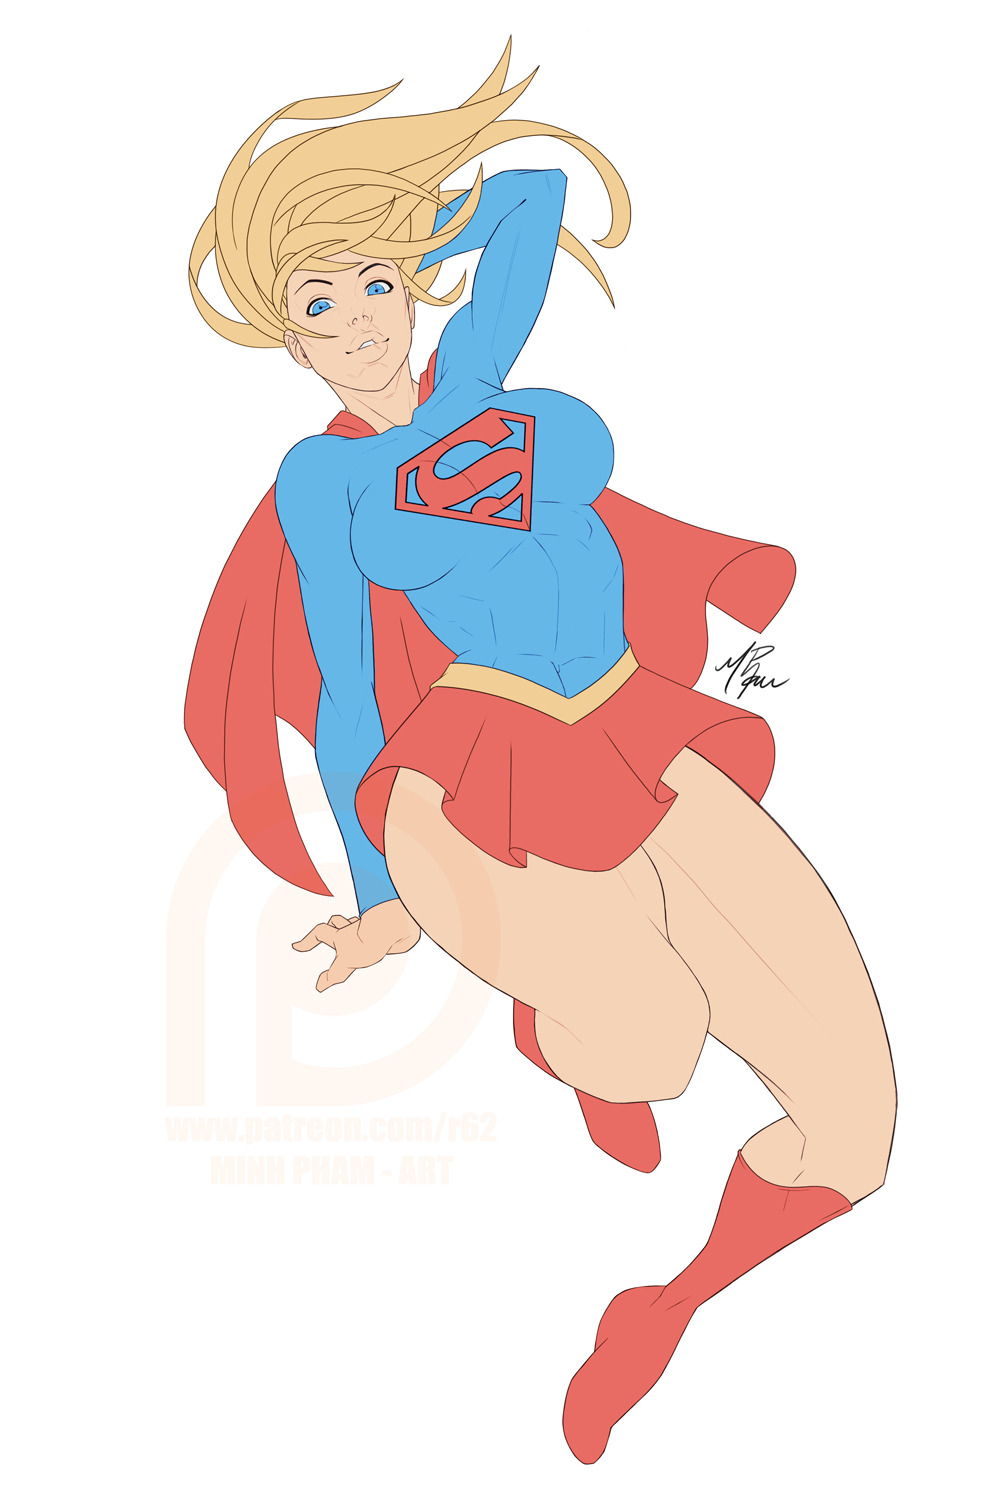 ryu62: PREVIEW - Supergirl This month’s patreon sponsored illustration is Supergirl